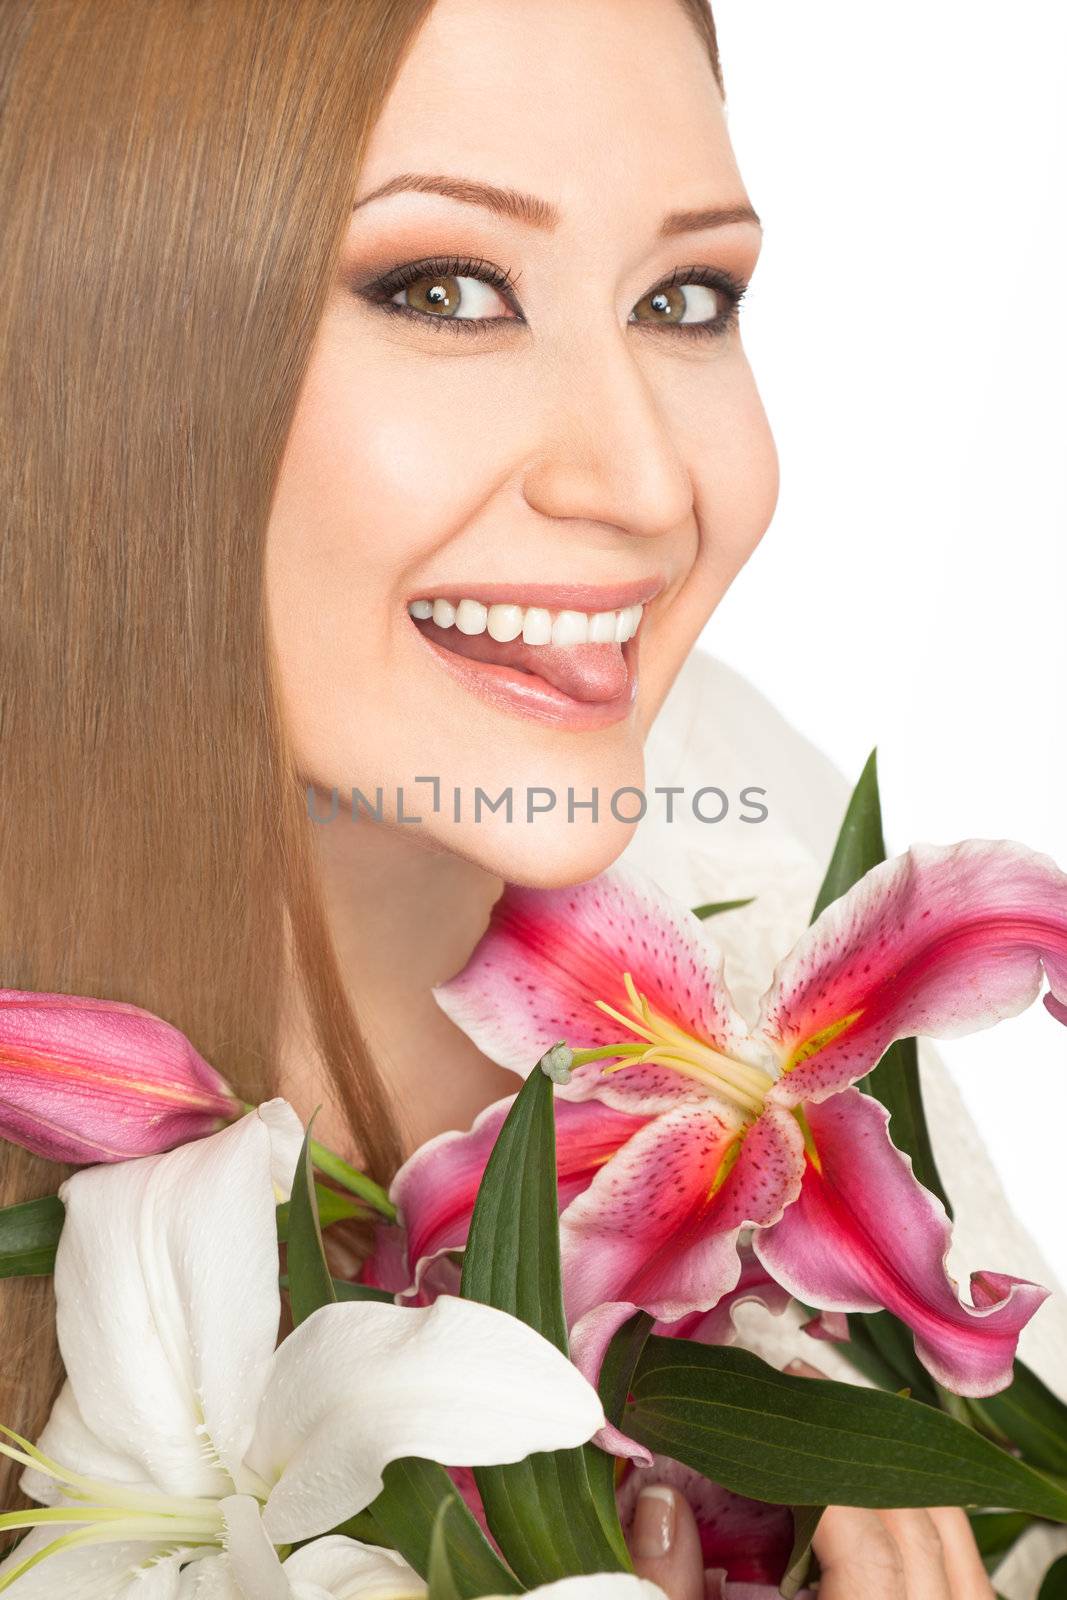 Portrait of young overweight woman holding lilies, smiling with tongue out at camera